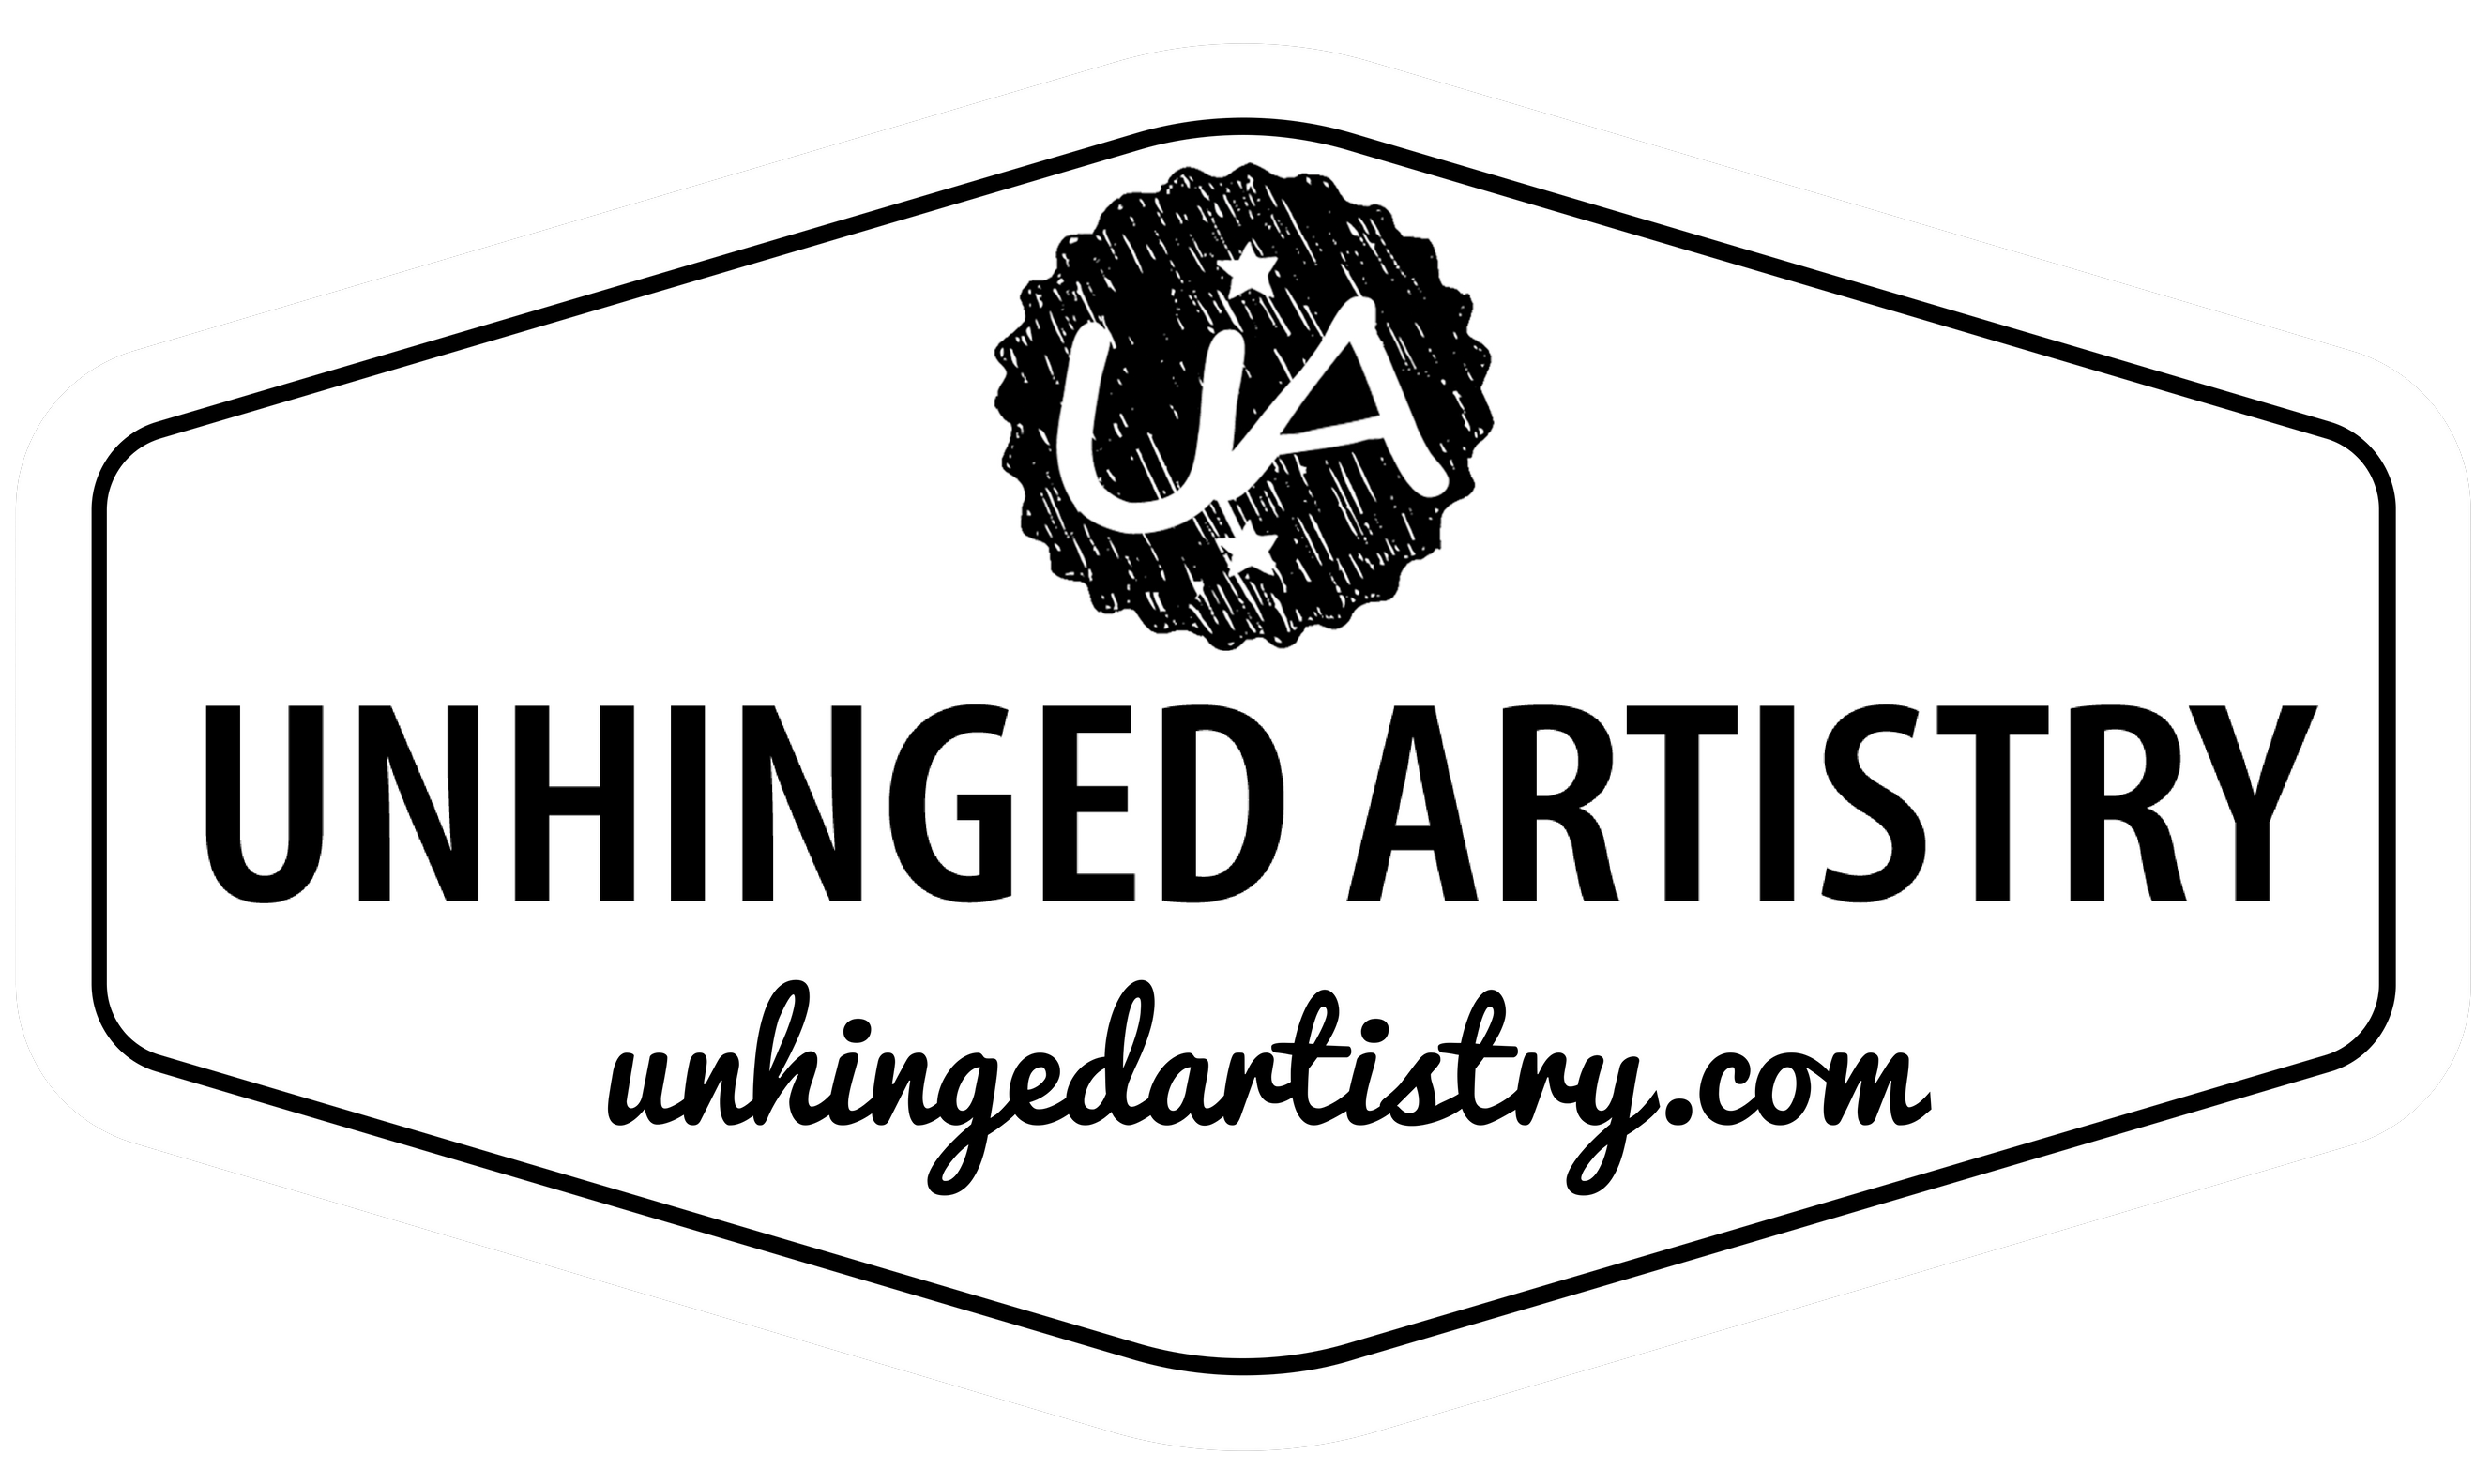 Unhinged Artistry